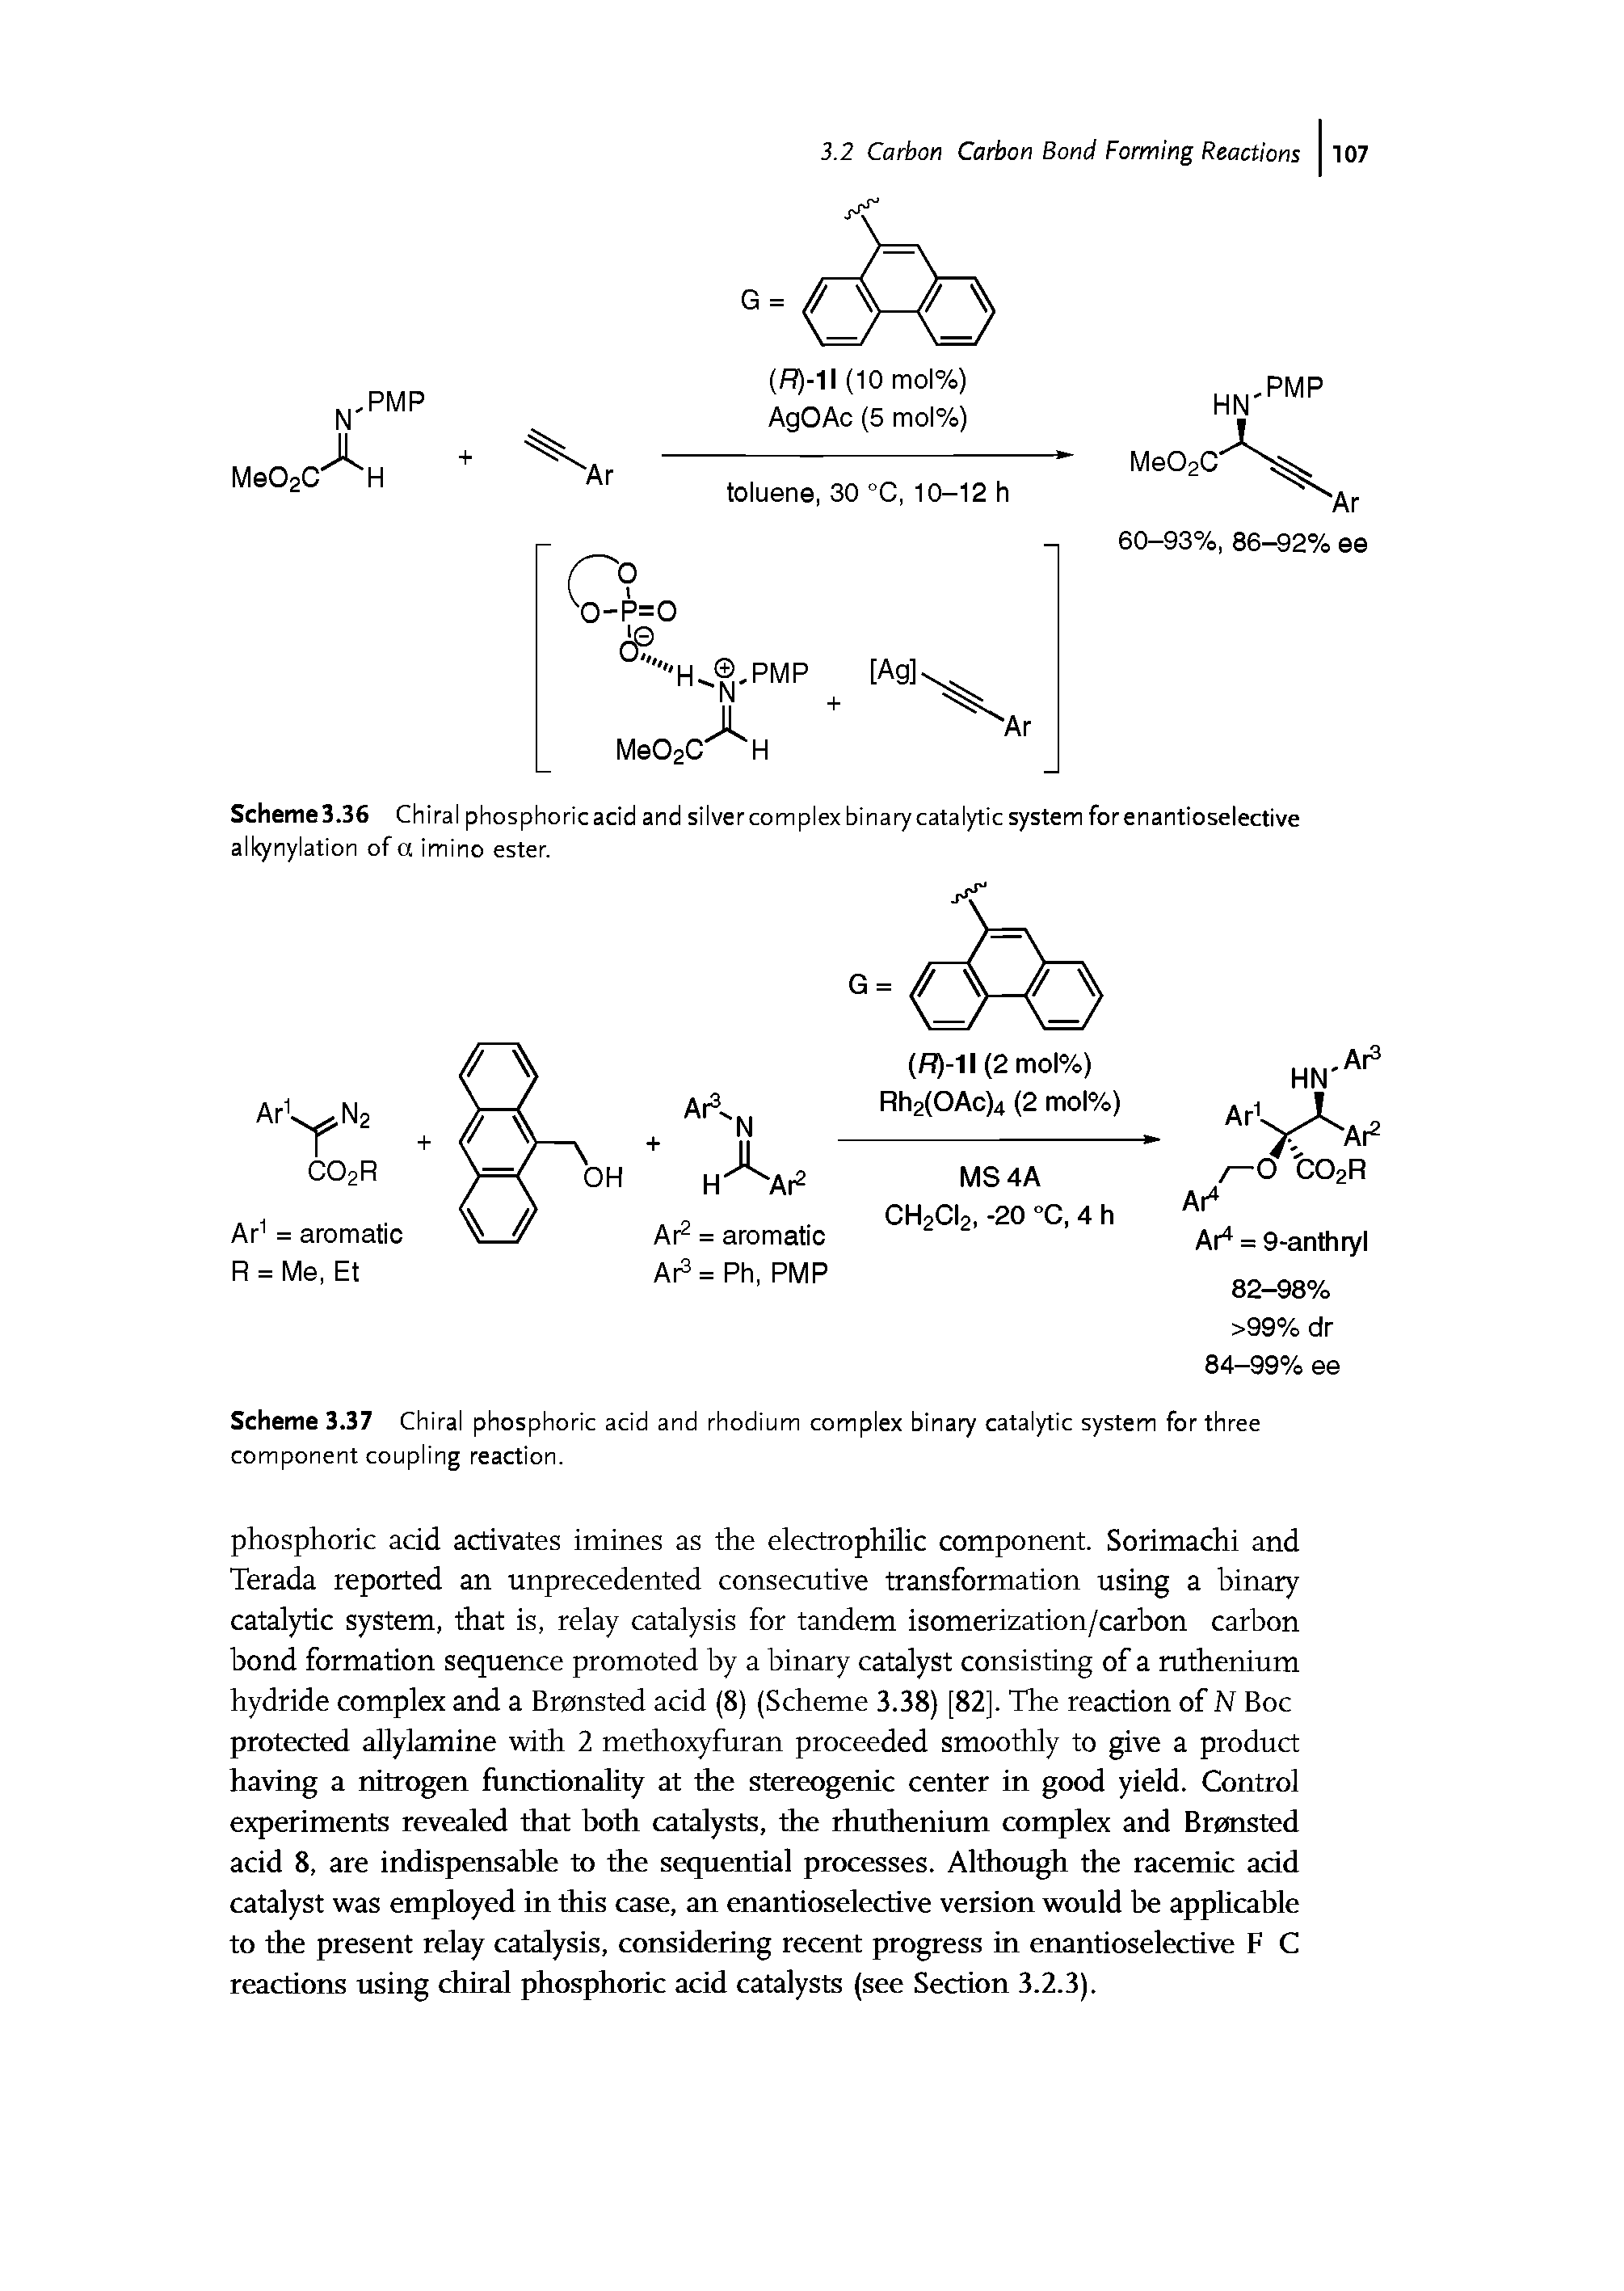 Scheme 3.36 Chiral phosphoric acid and silver complex binary catalytic system for enantioselective alkynylation of a imino ester.